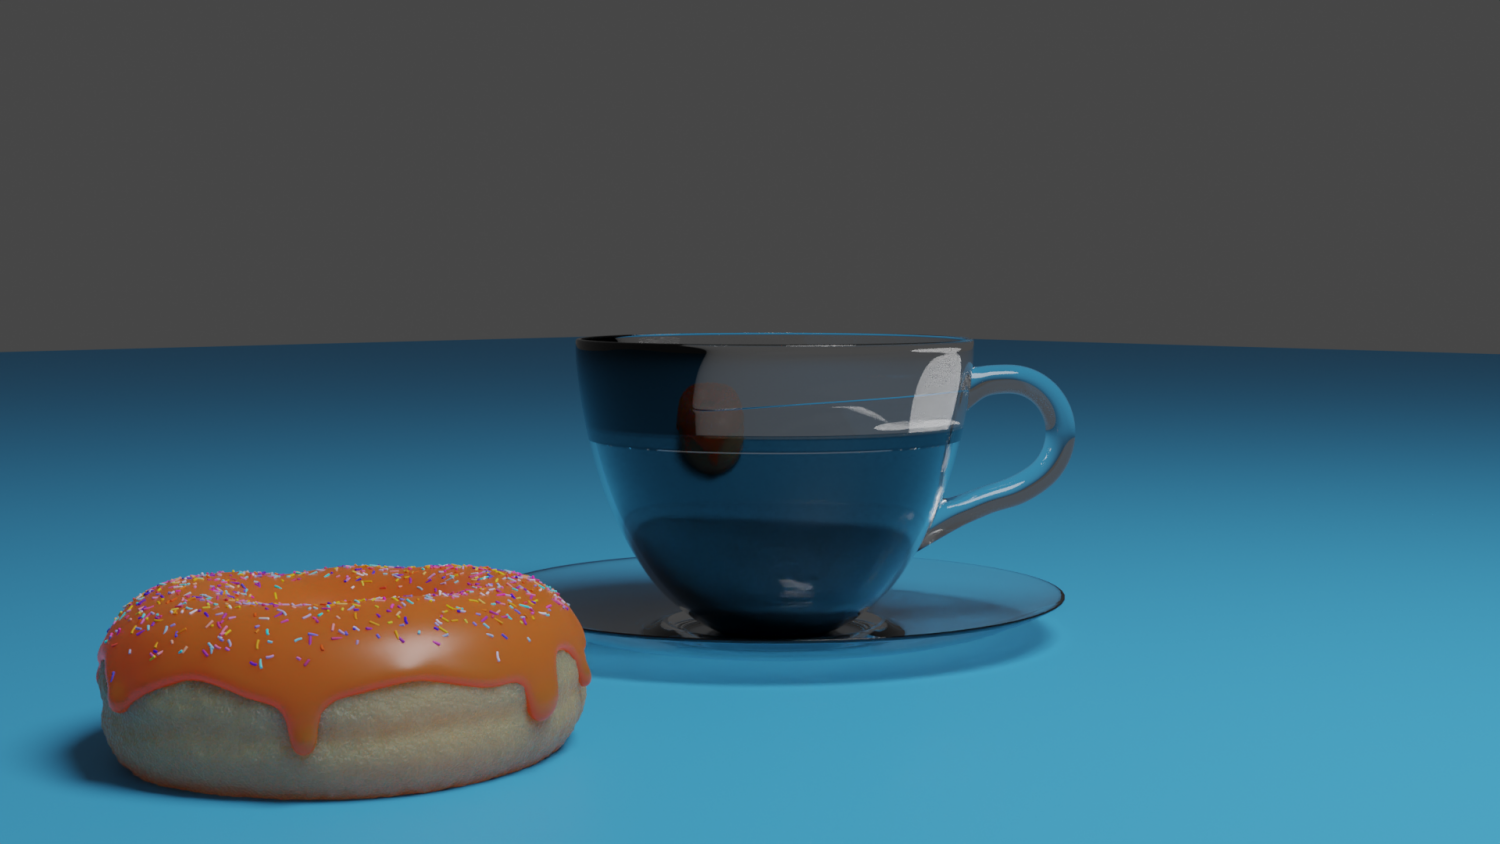 Animation II students are delving into 3D animation by creating a 3D donut and coffee cup in the animation software, Blender. For this assignment, they will follow tutorials to guide them through the process. “I am enjoying following a specific guide on how to use Blender,” sophomore Simon Tolentino said. “I feel like I am learning the necessary steps to 3D animation and I am truly enjoying it.” Photo Credit: Farhad Yazdani